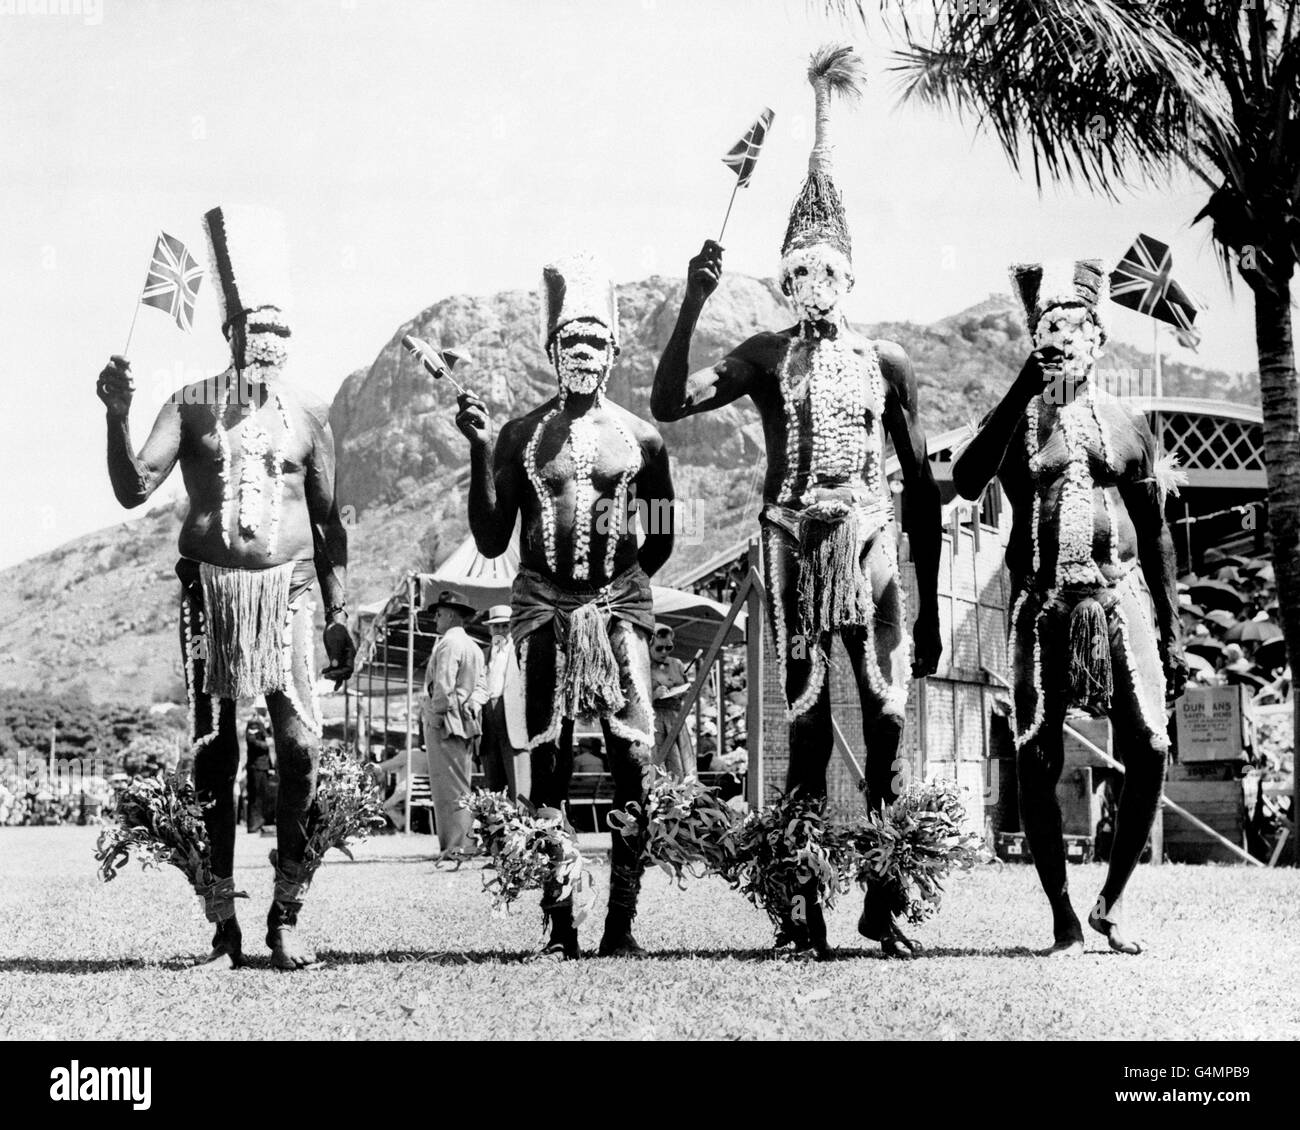 Aborigines wave union jack flags as they wait to see Queen Elizabeth II, during her tour of Australasia. Stock Photo